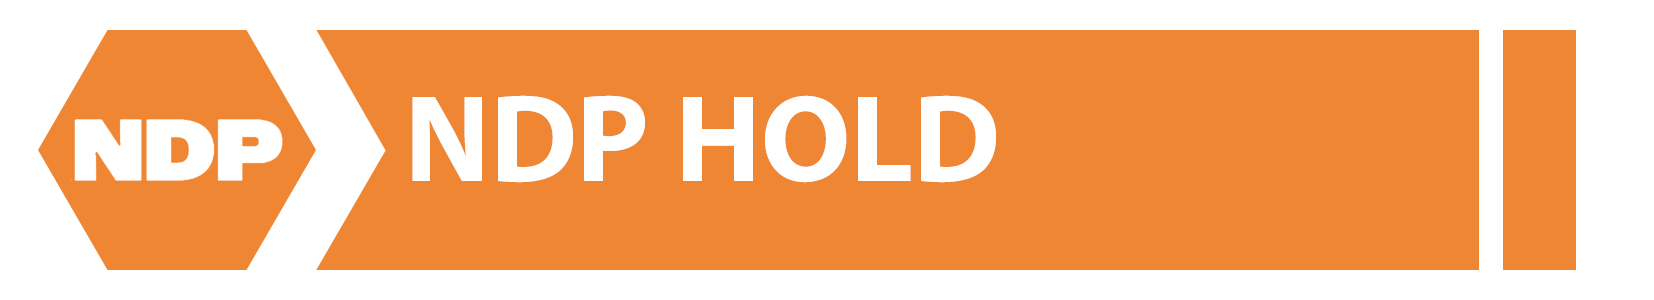 ndp hold